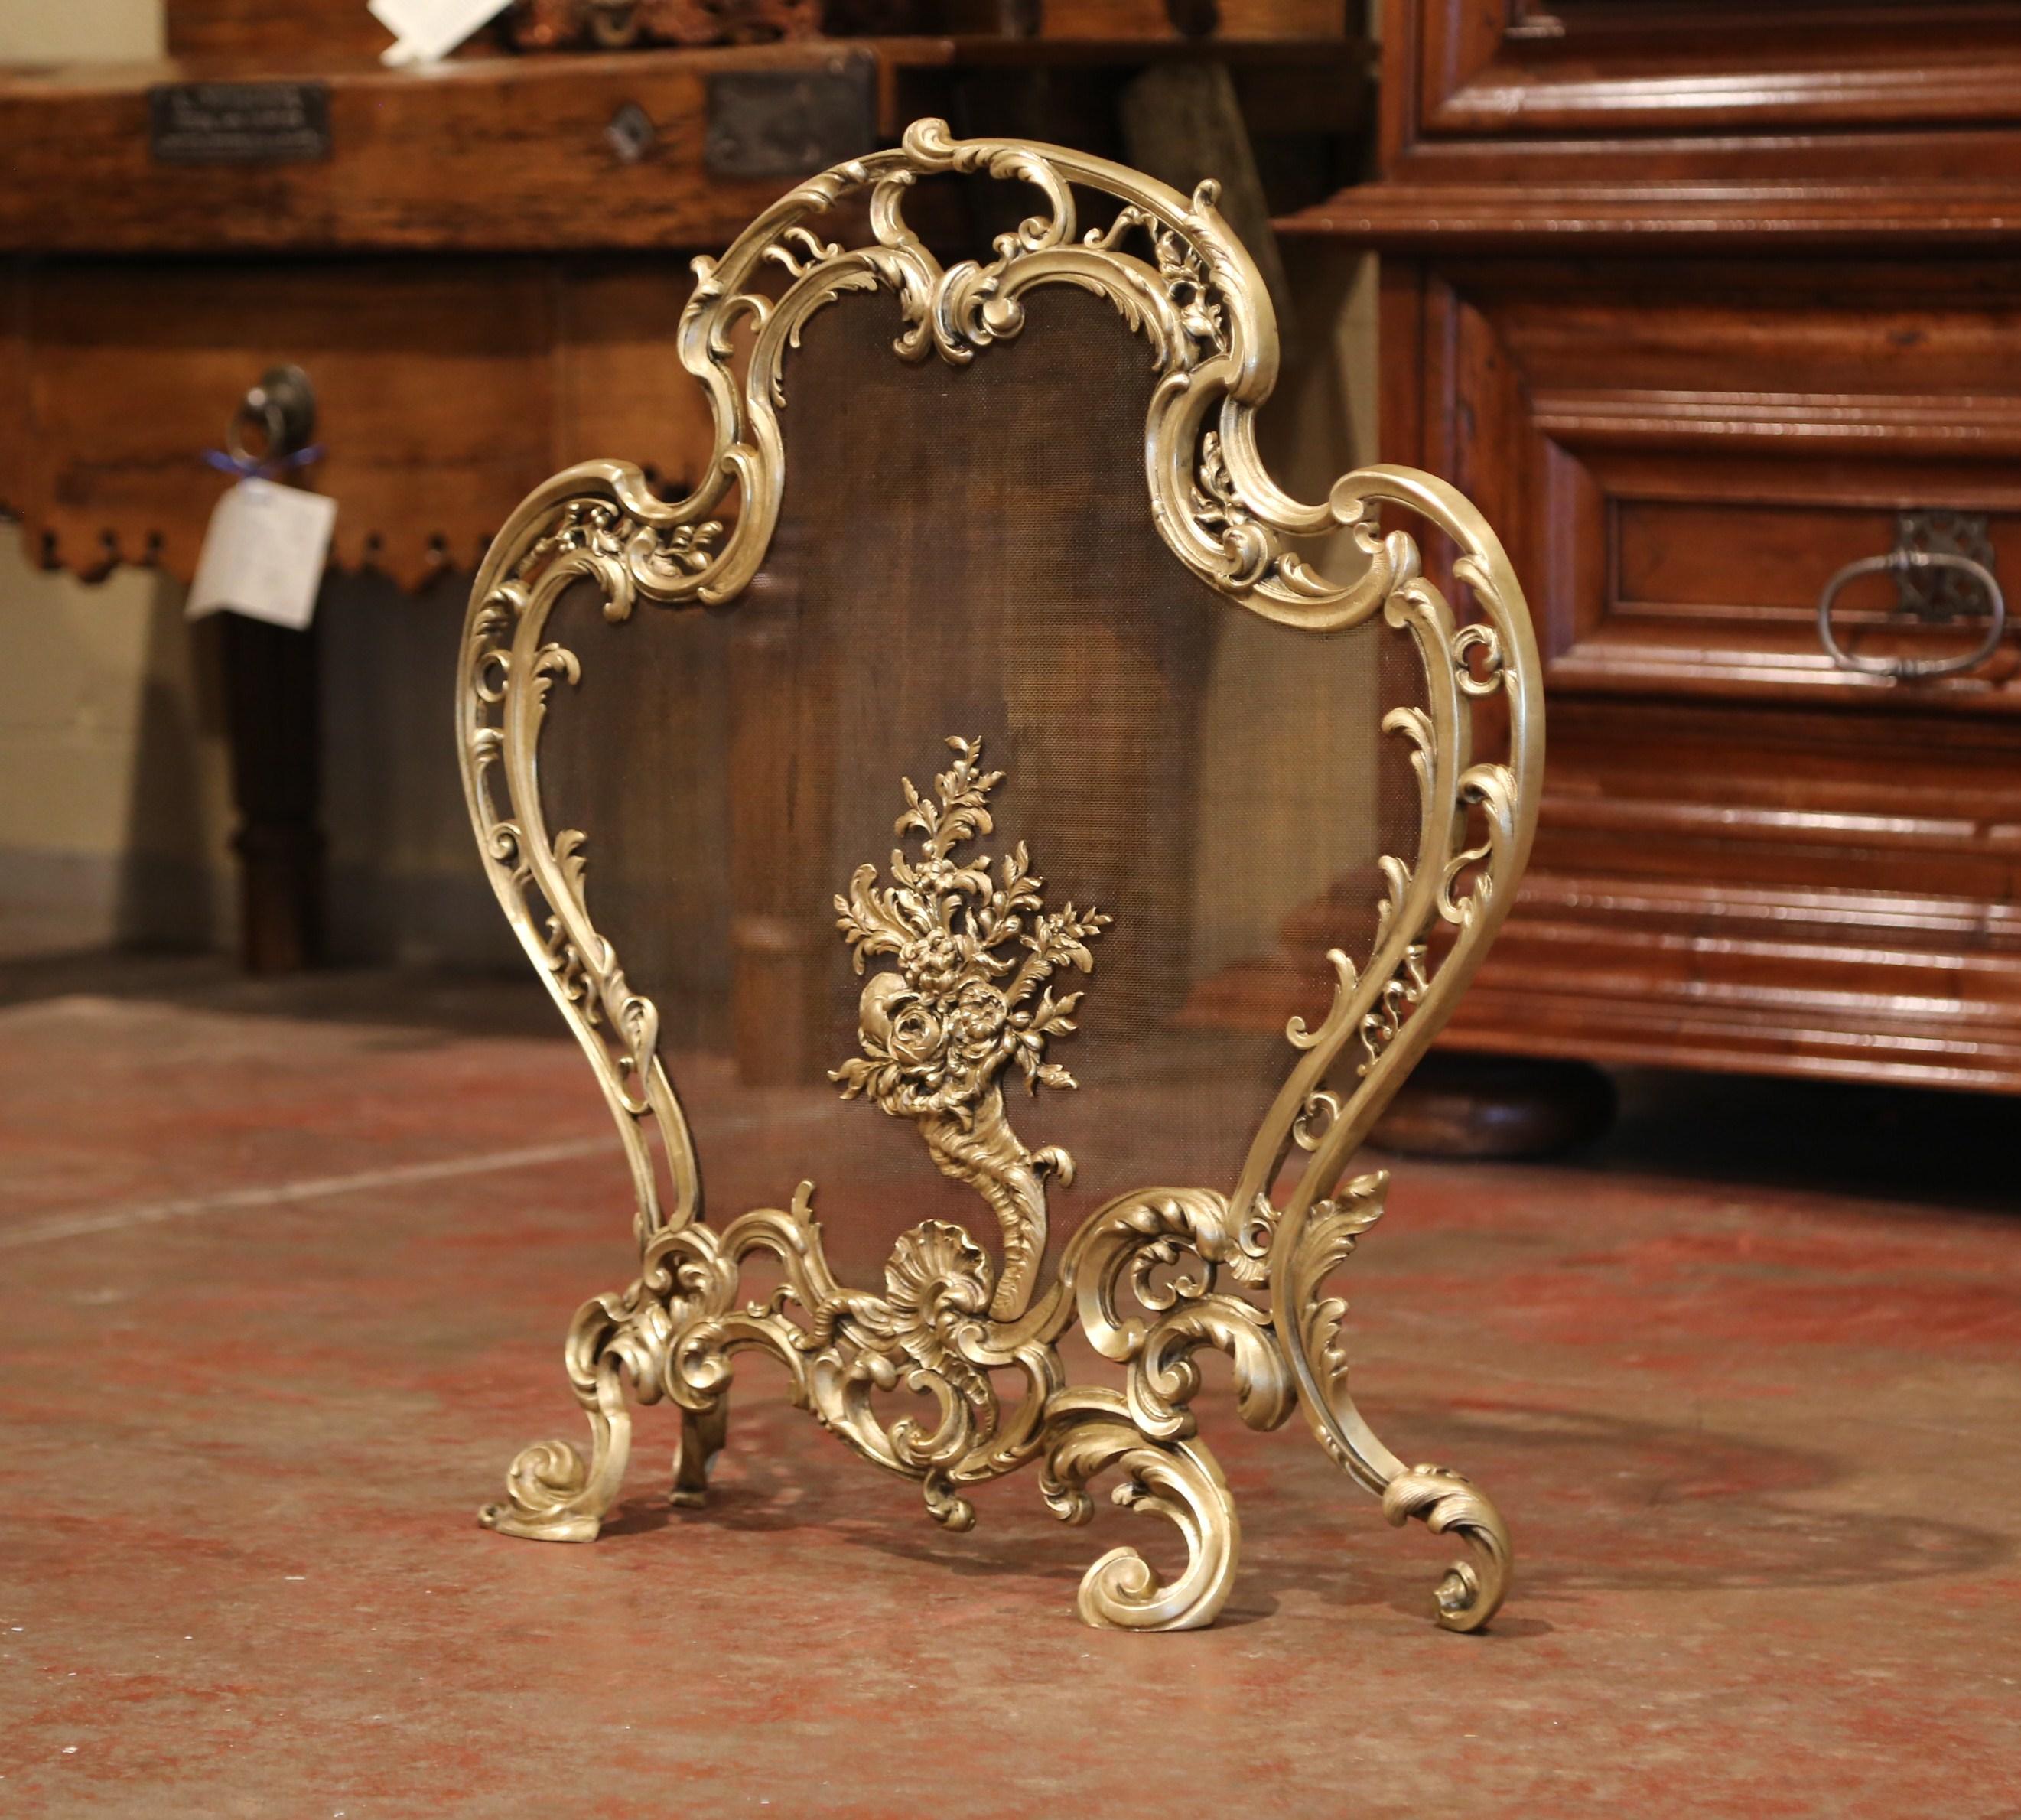 Decorate your fireplace with this antique bronze screen; crafted in France circa 1870, the cartouche shaped screen sits on four scrolled feet and features Louis XV style motifs including asymmetrical foliage swaths, and a center medallion with